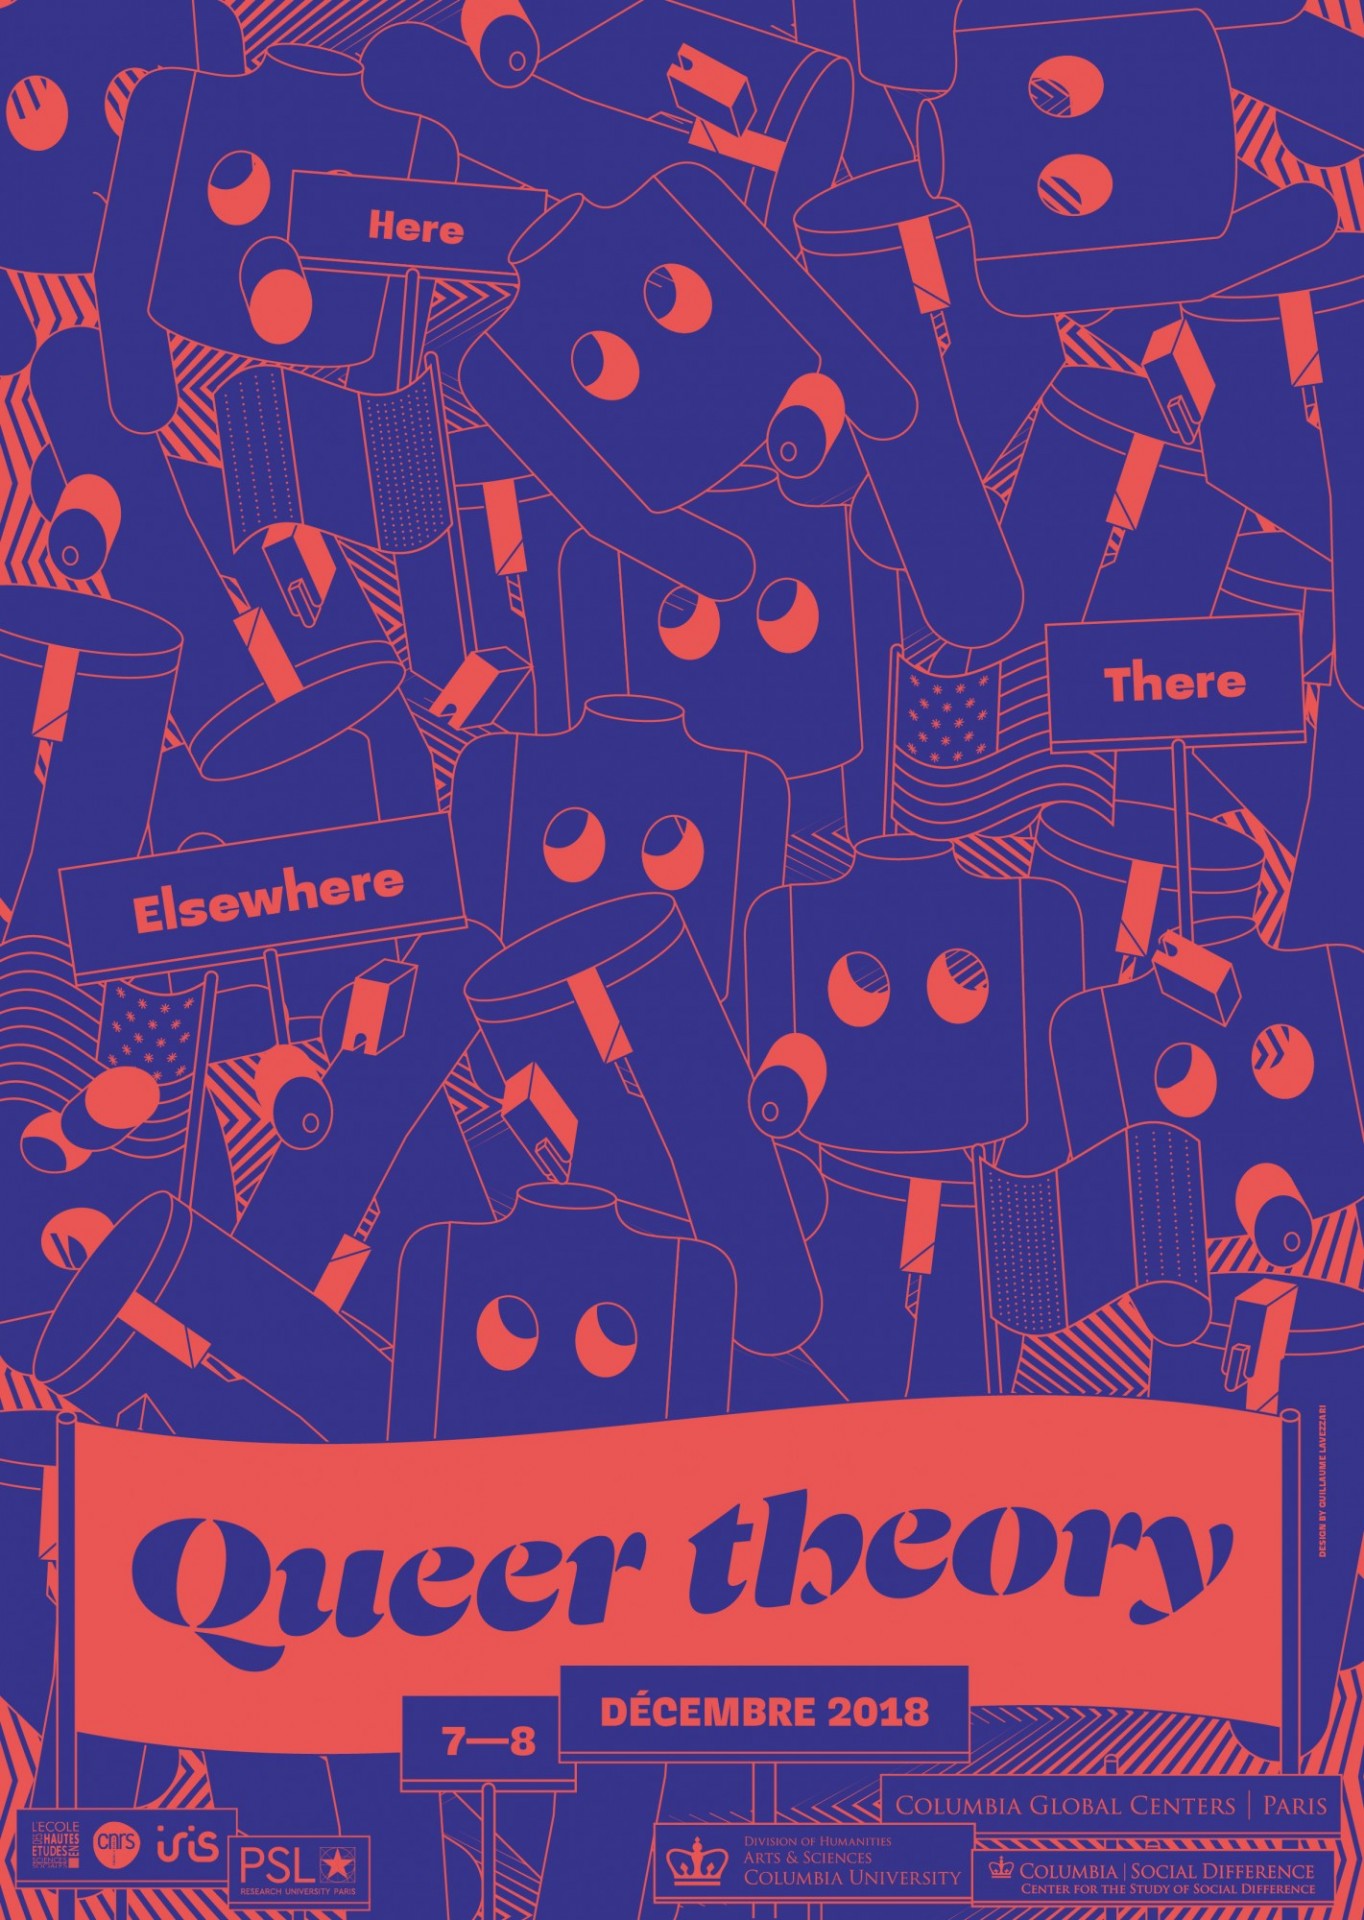 Queer theory poster